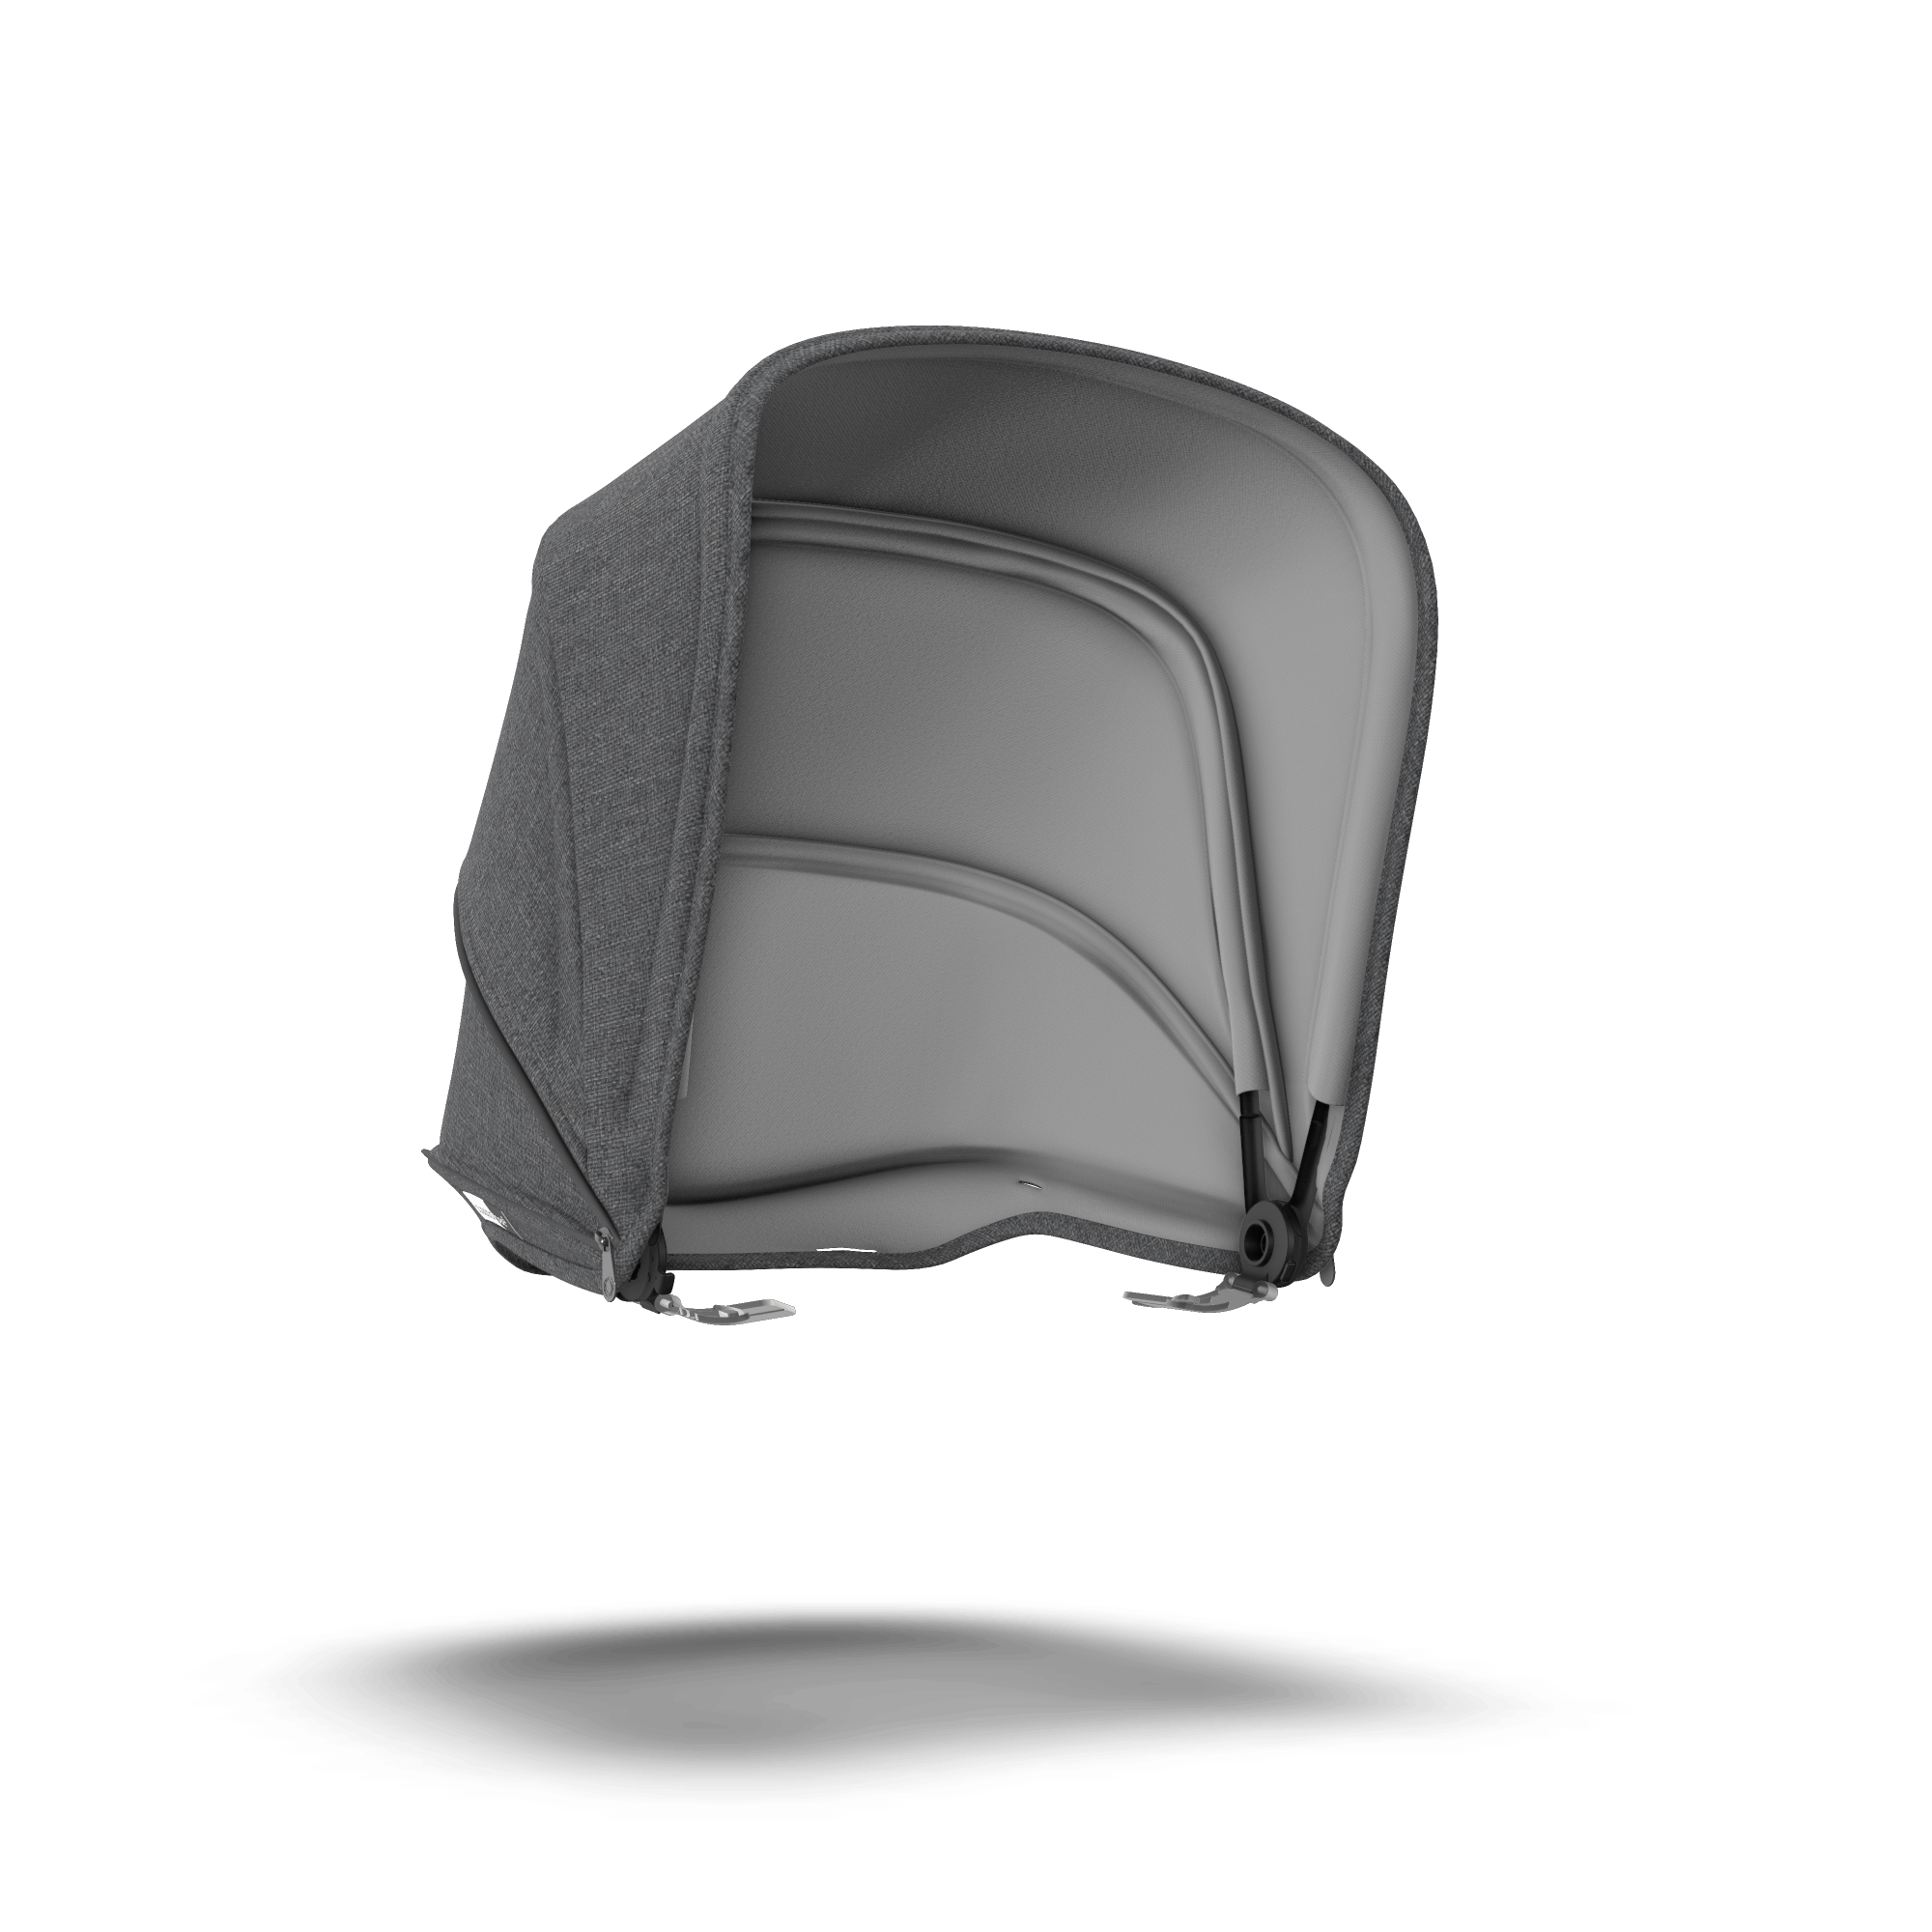 bugaboo bee canopy colors